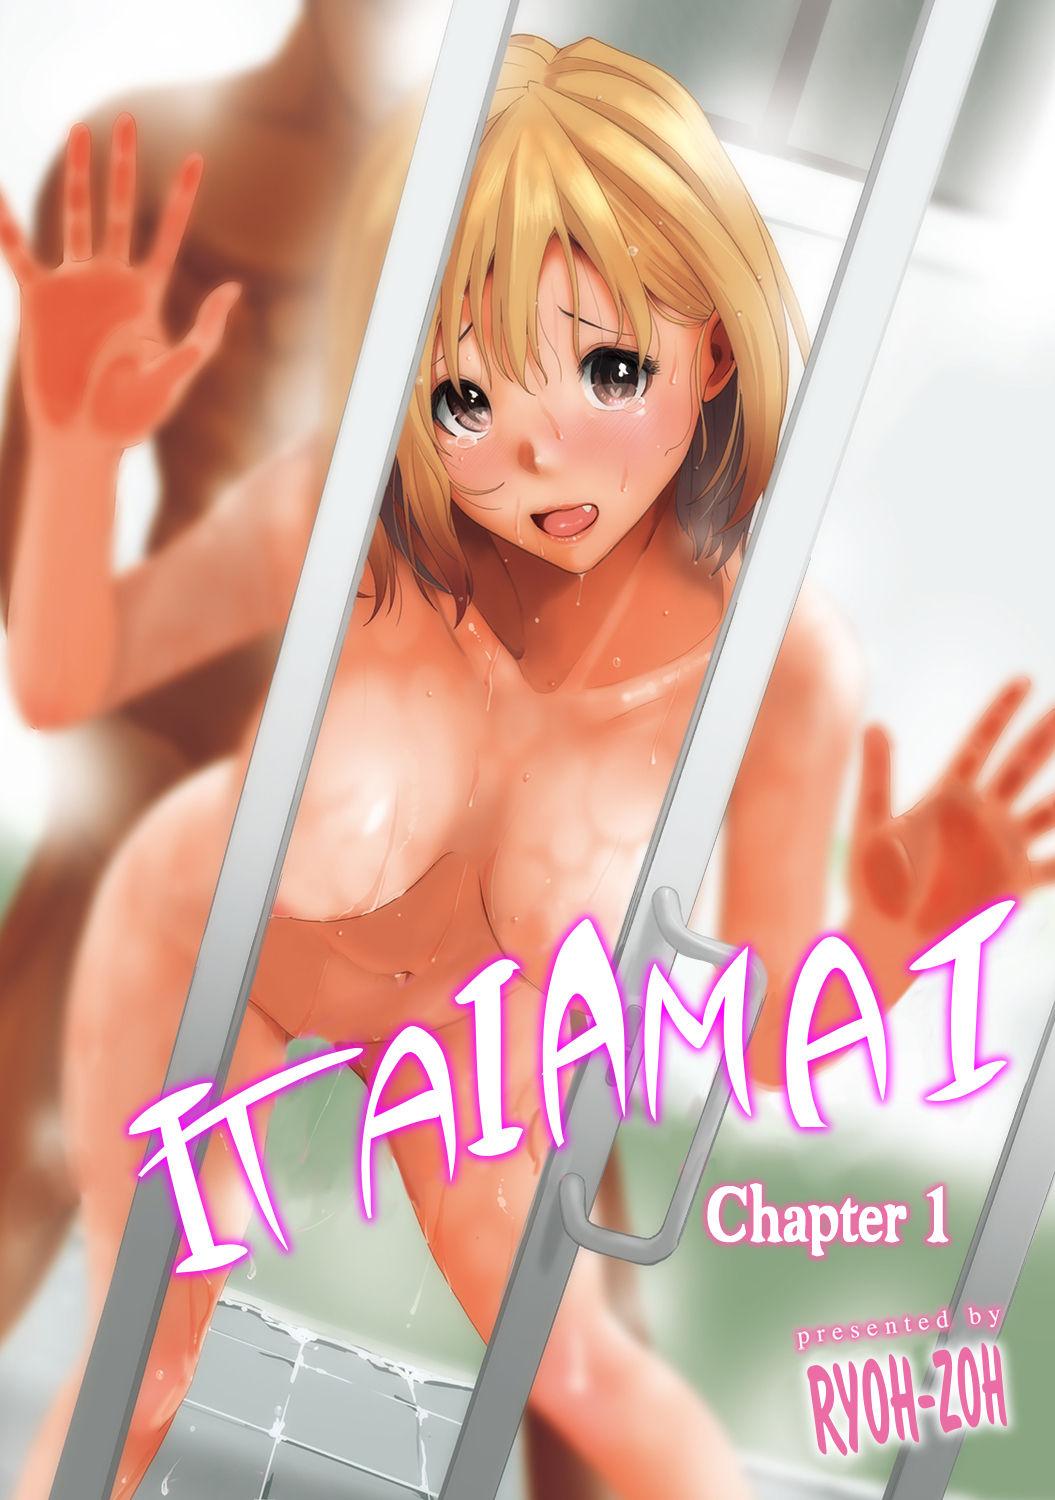 Russian Itaiamai - Chapter 1 Twink - Picture 1